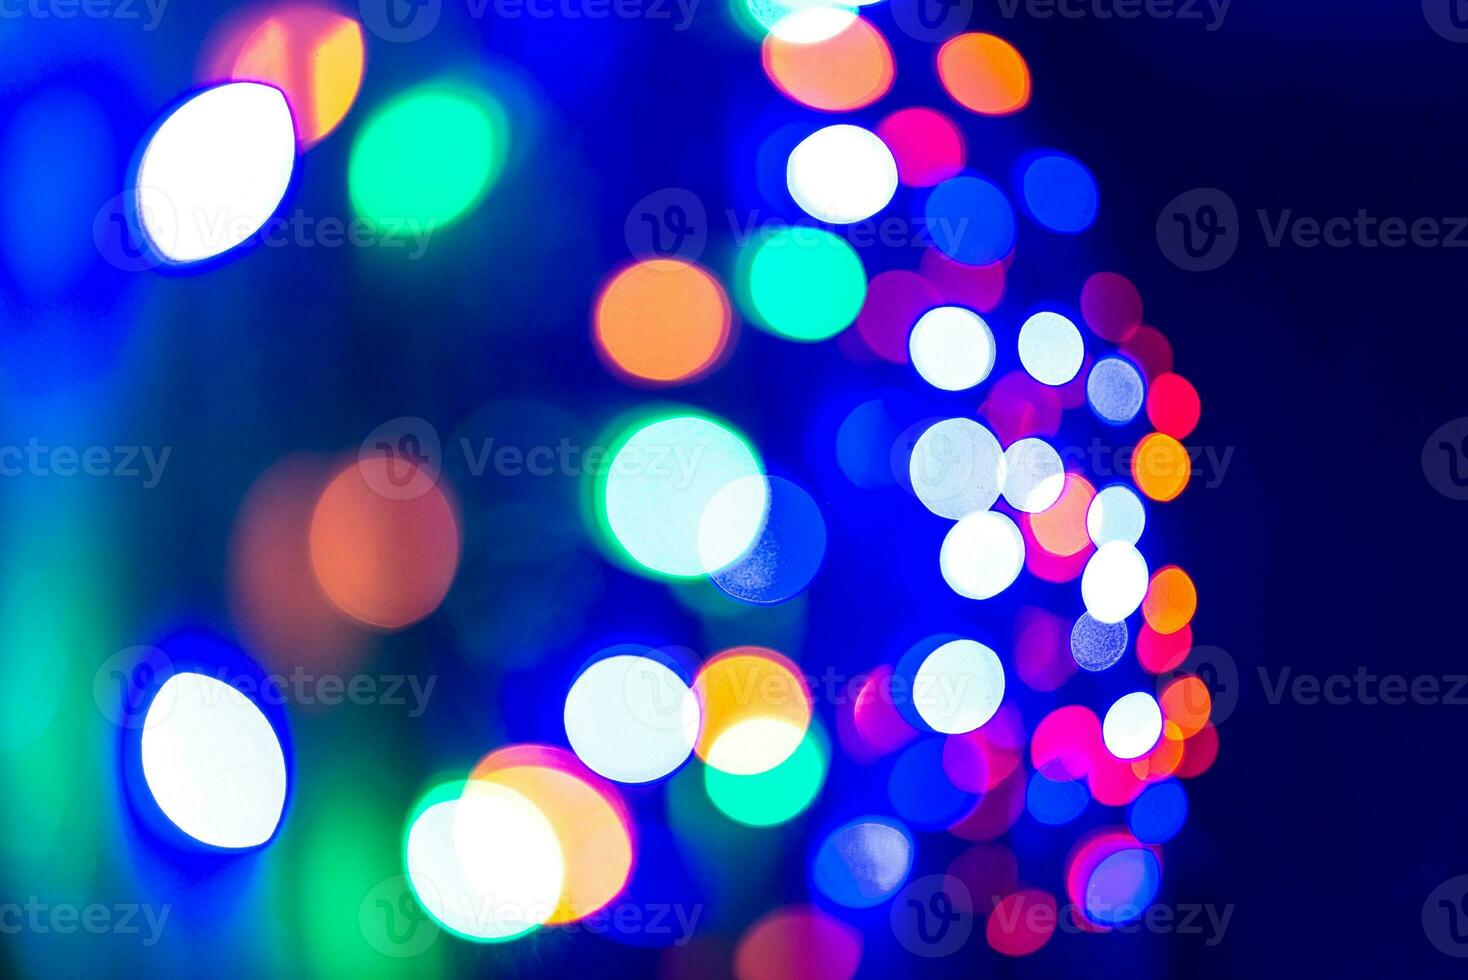 Colorful garland lights background photo